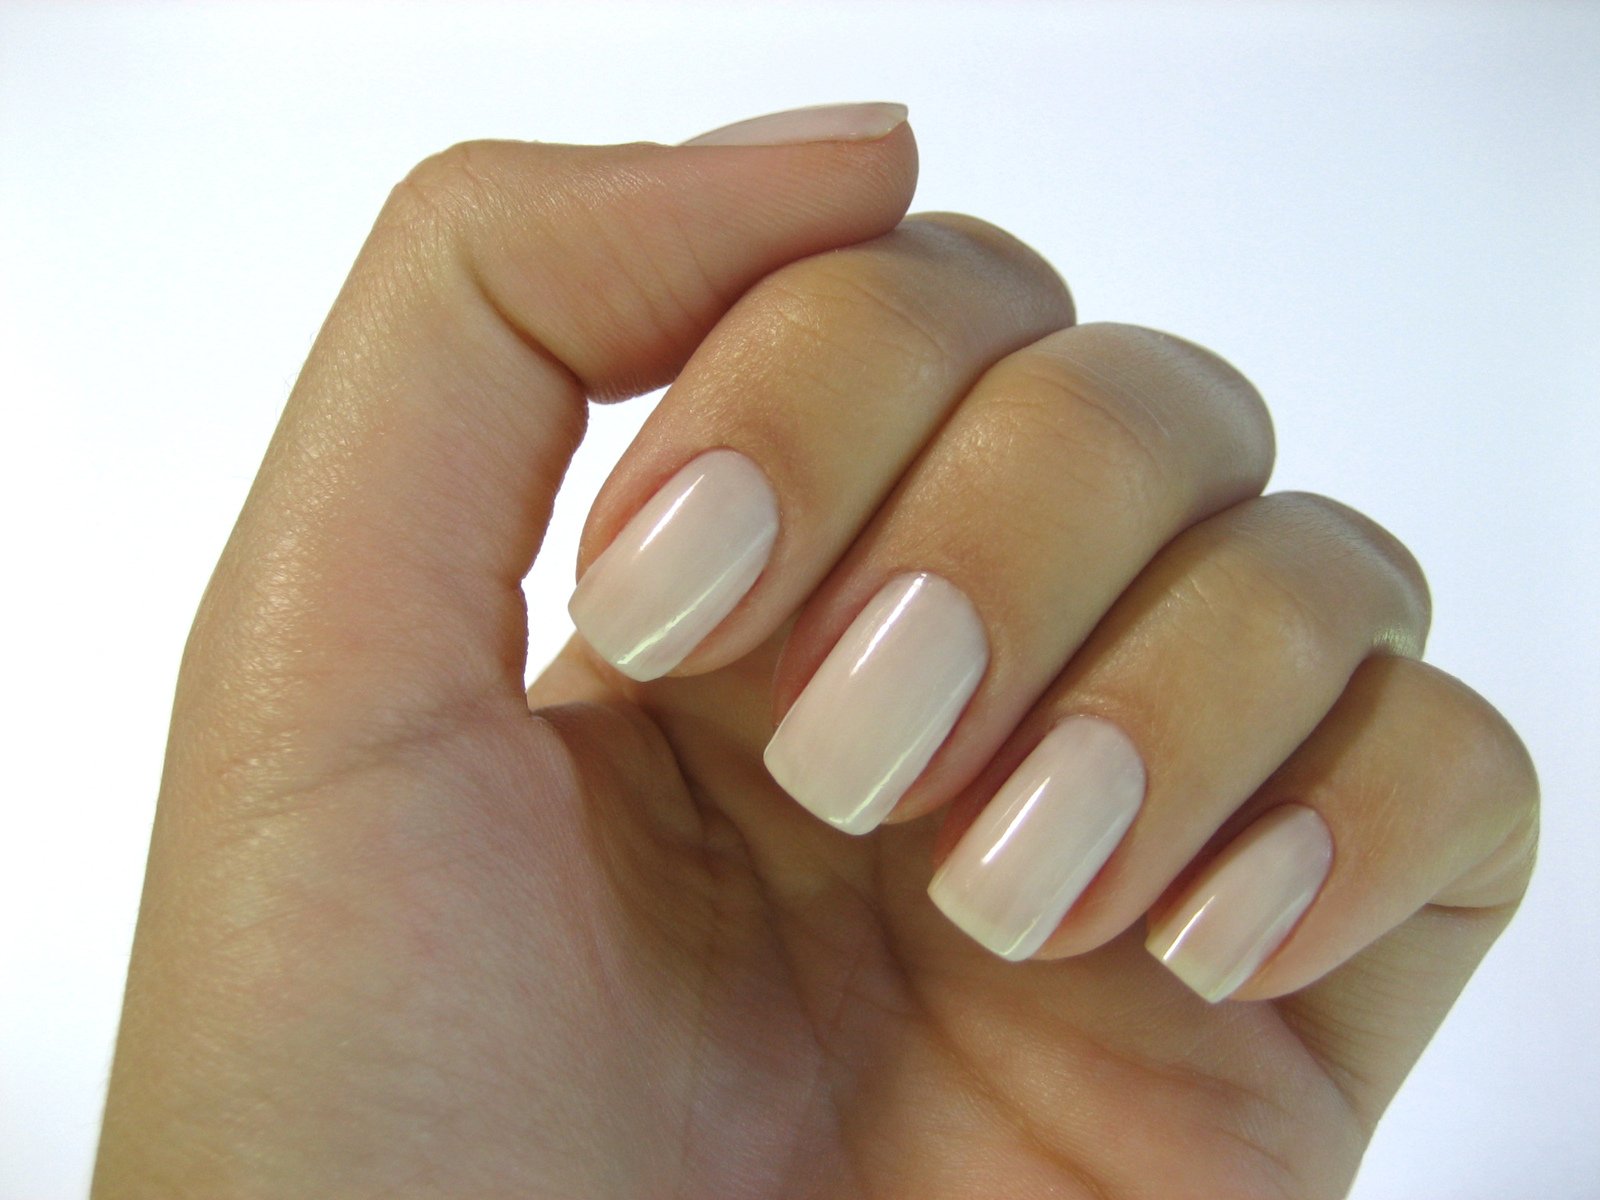 hand holding a manicured nail that is white and has a white background